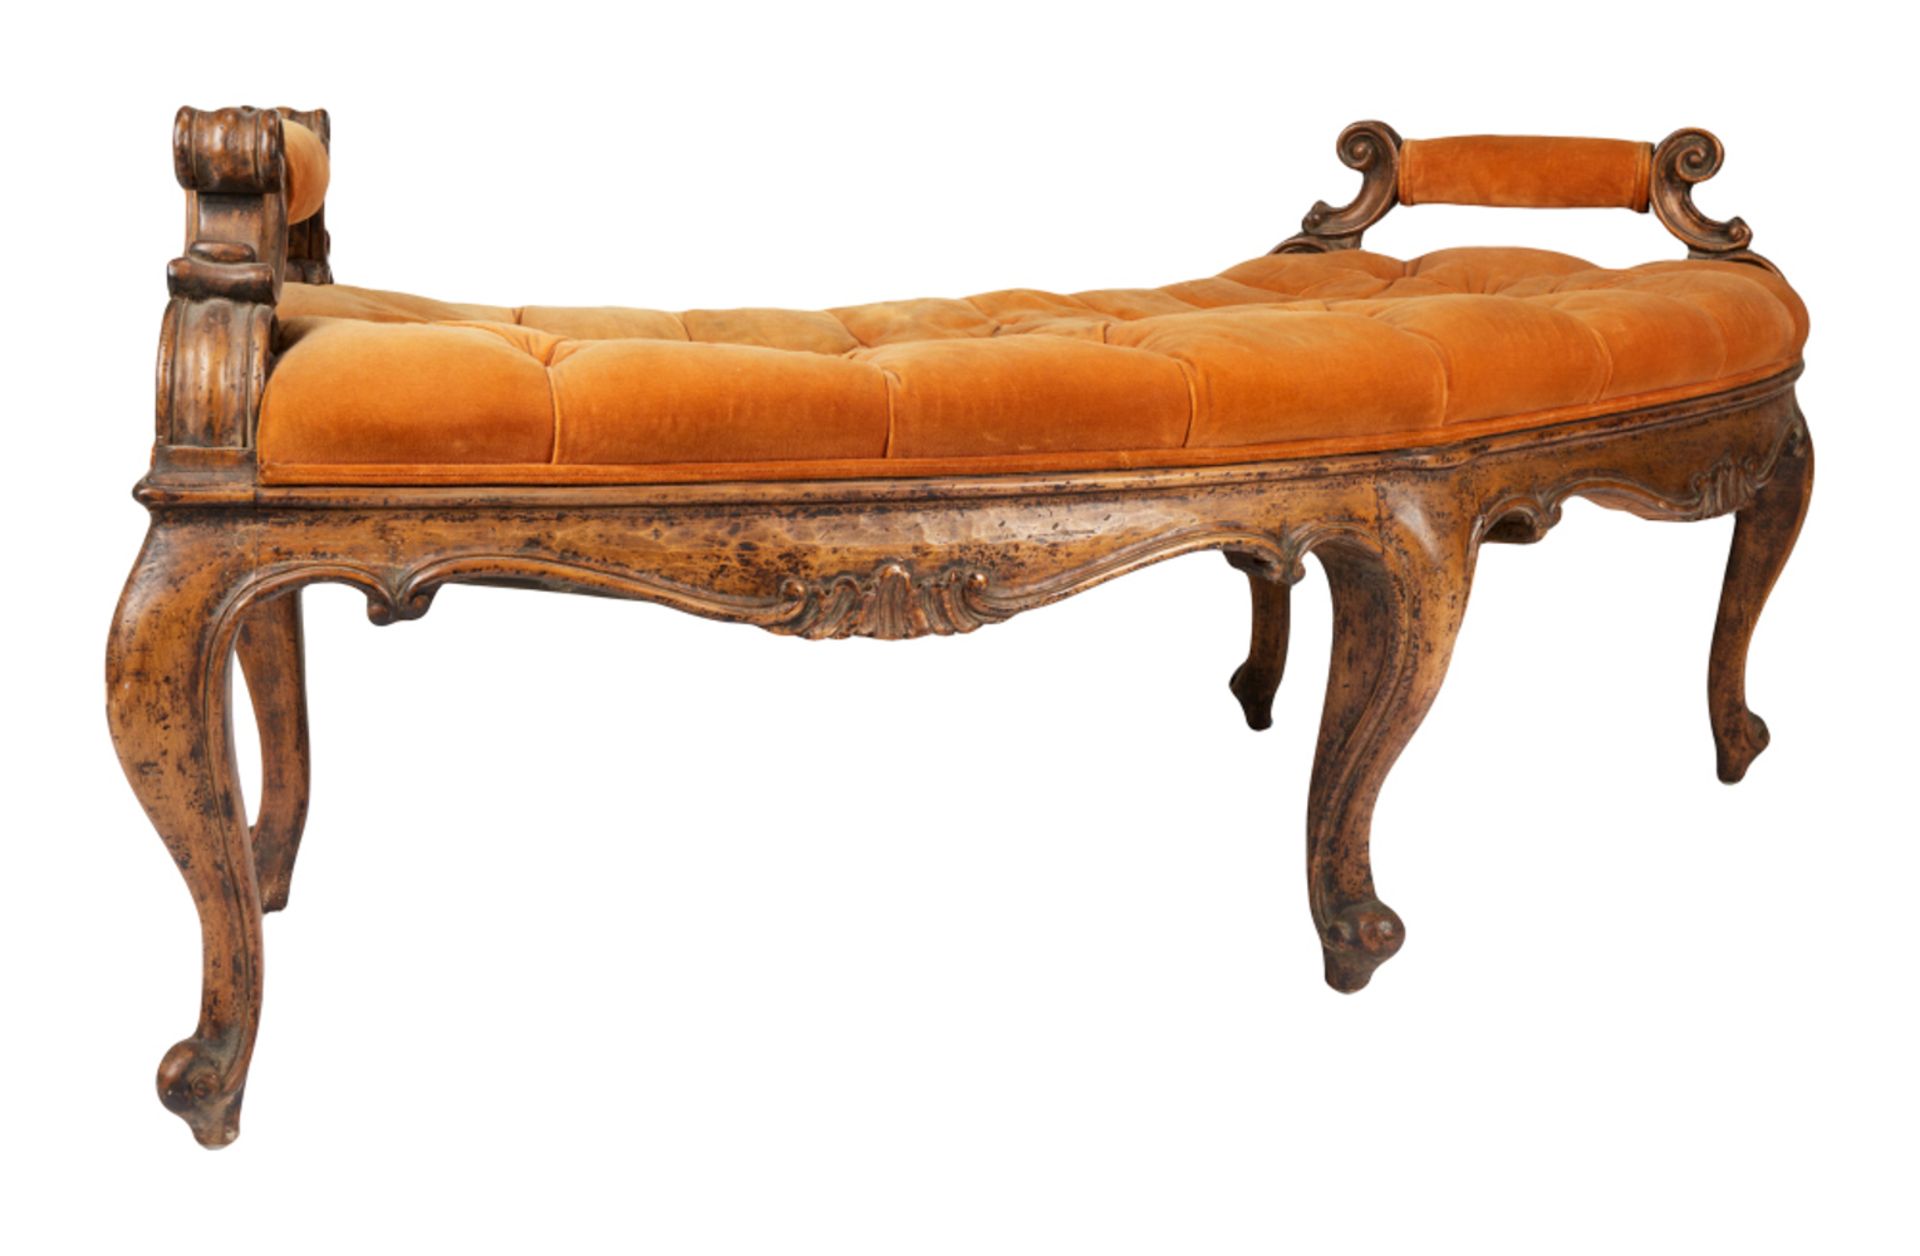 ROBERT EVANS | UPHOLSTERED CURVED BENCH - Image 9 of 18